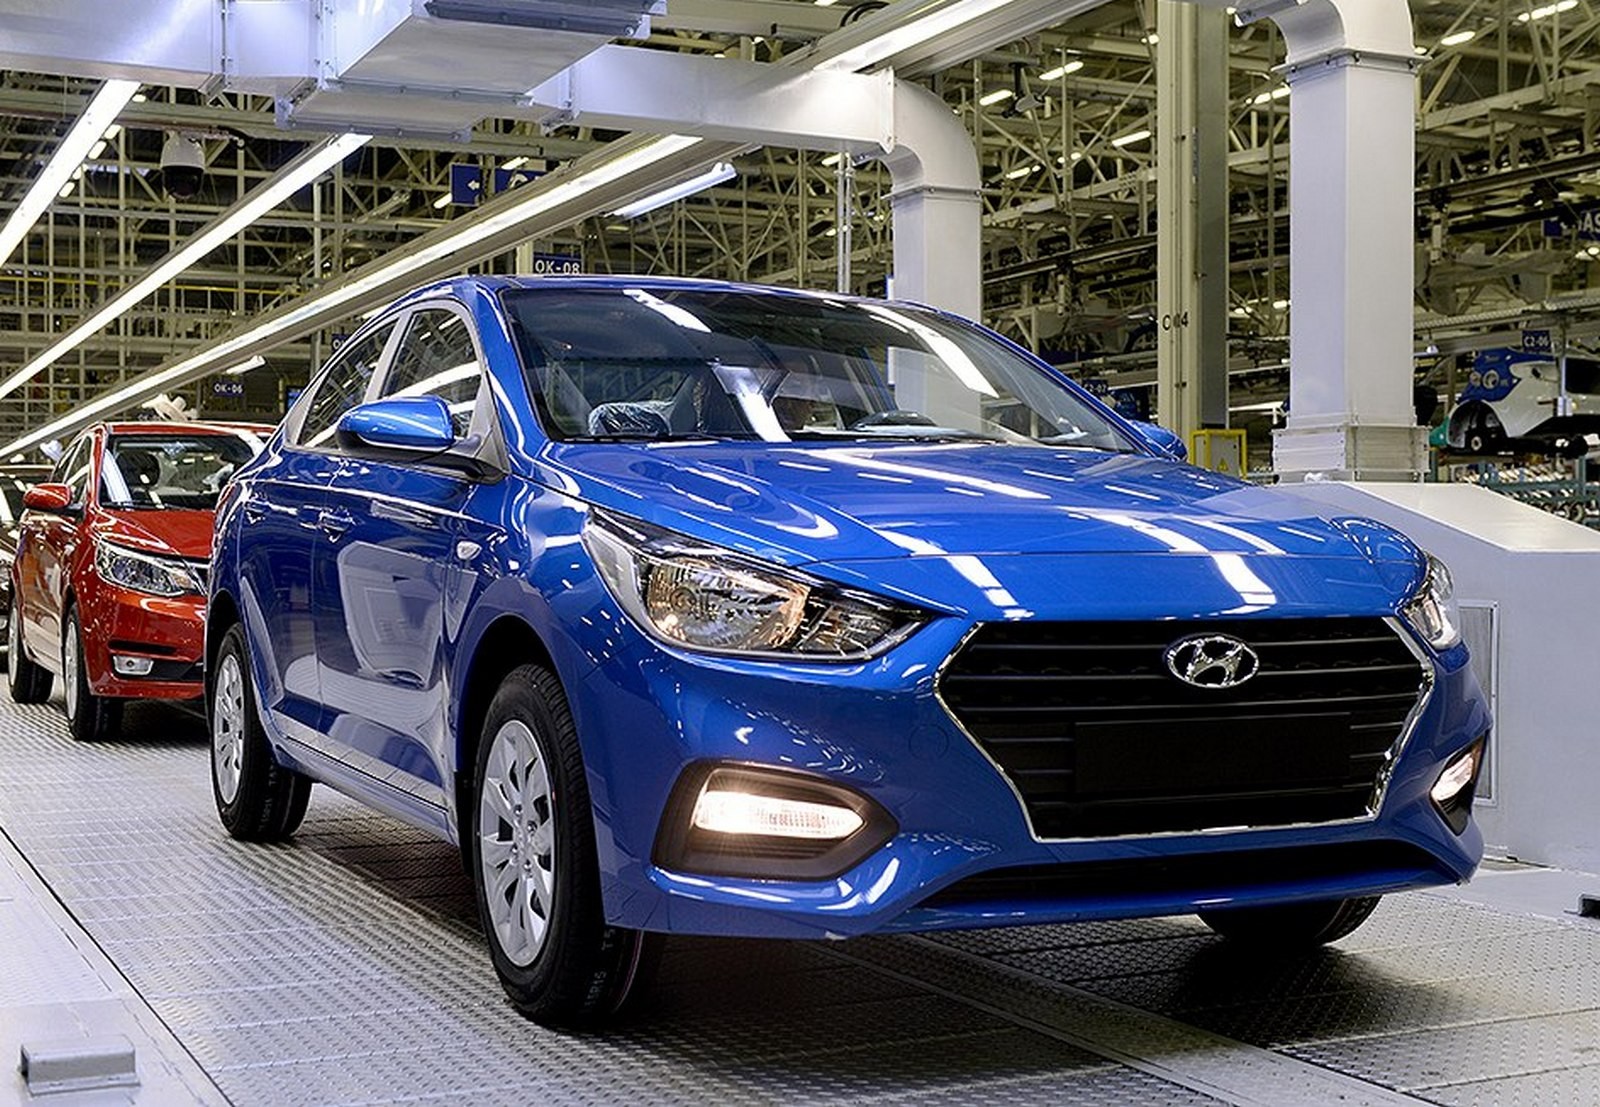 Serial Production Of New Hyundai Solaris Started In Russia